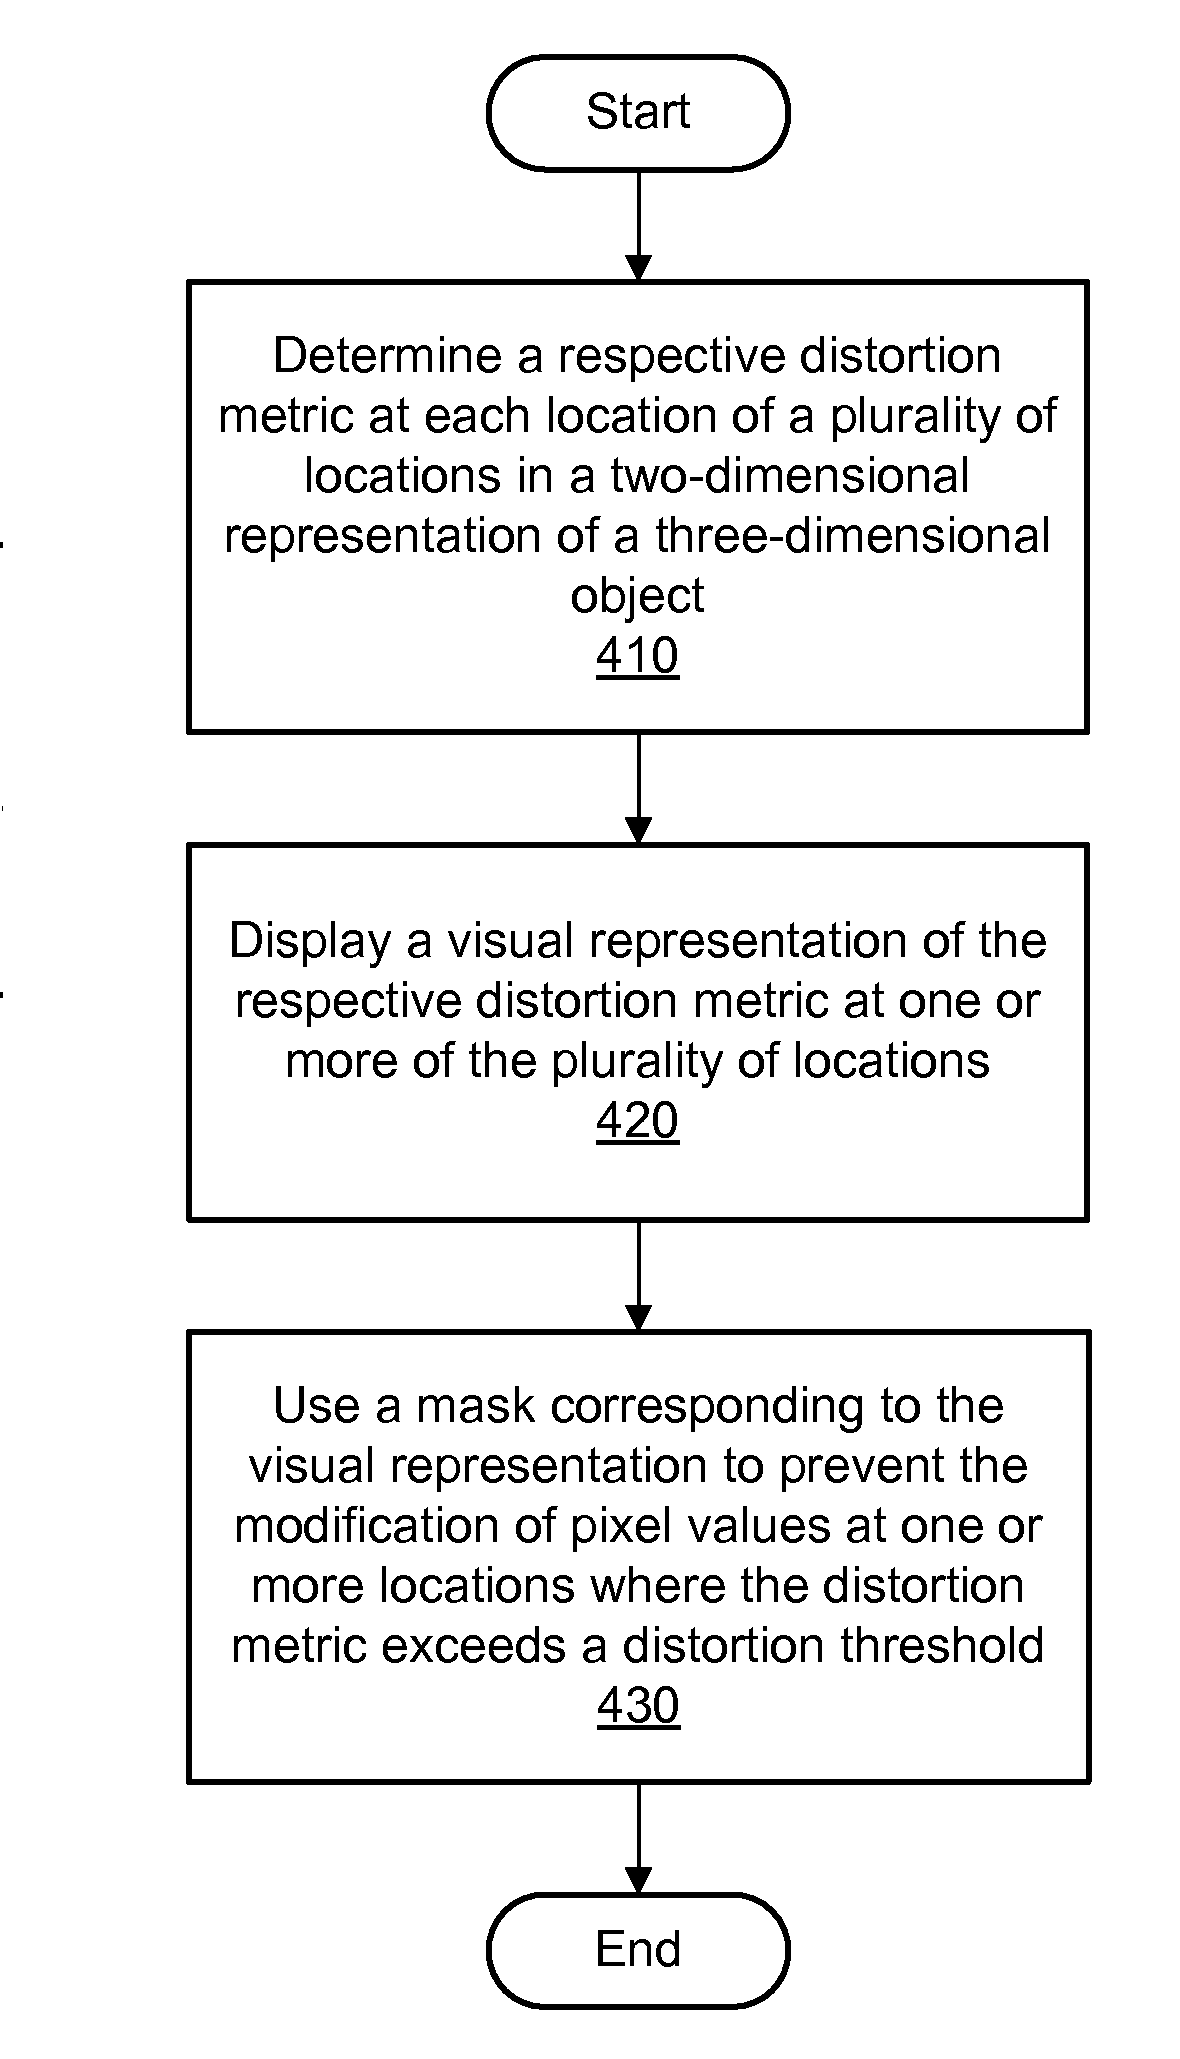 Preventing pixel modification of an image based on a metric indicating distortion in a 2d representation of a 3D object